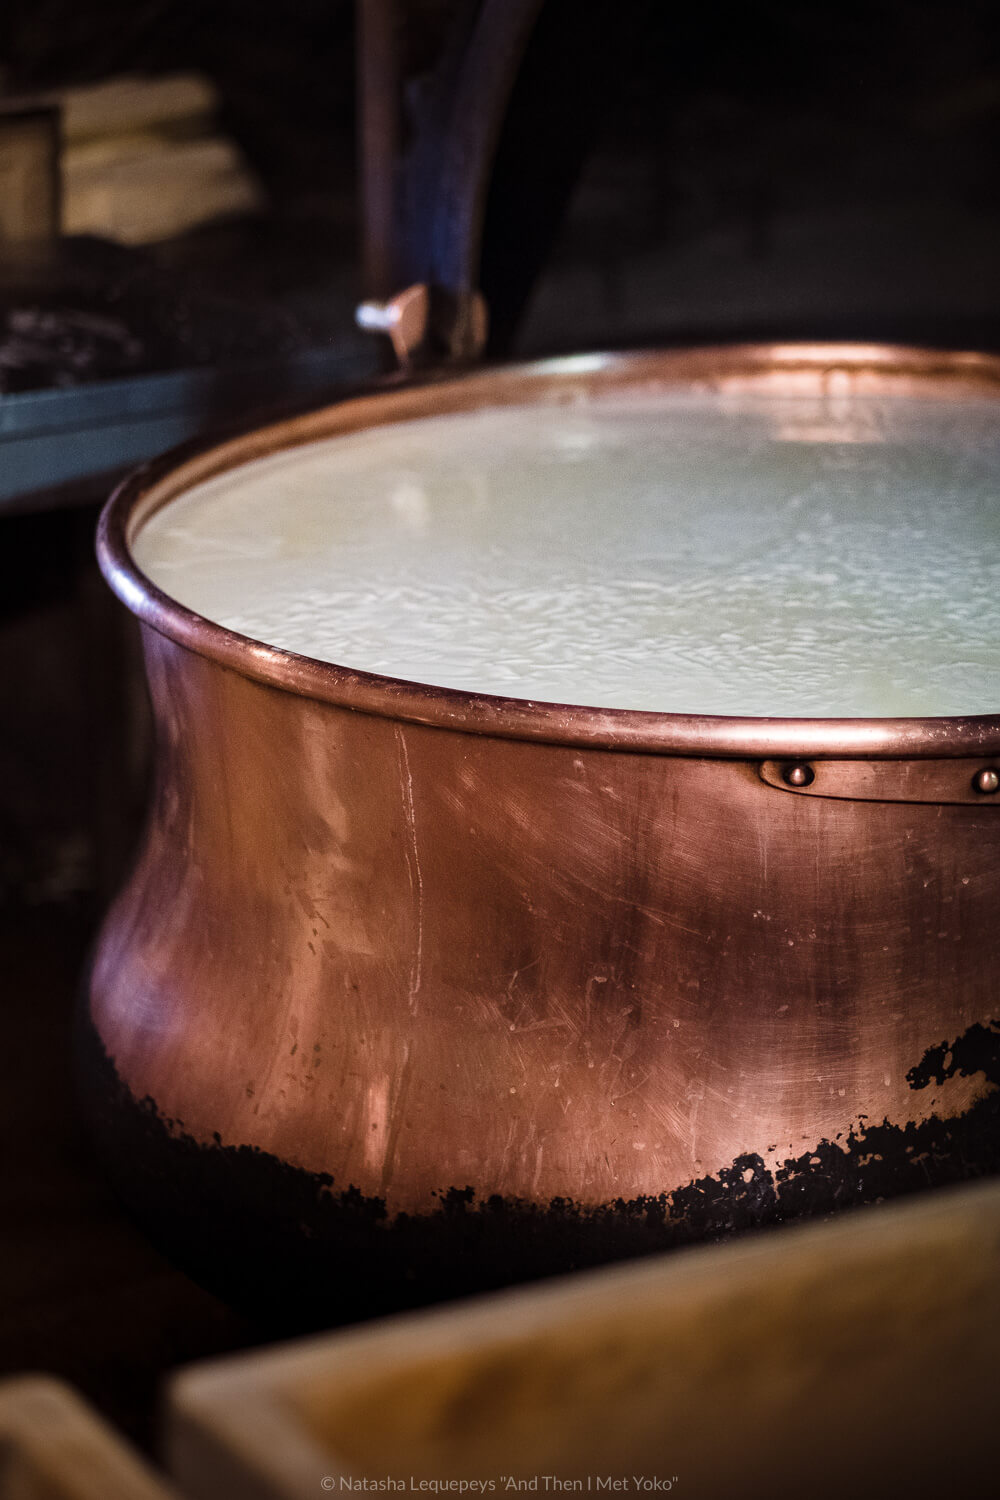 Copper cauldron in Moléson-sur-Gruyères, Switzerland. Travel photography and guide by © Natasha Lequepeys for "And Then I Met Yoko". #alpinecheese #lemoléson #gruyeres #switzerland #travelphotography